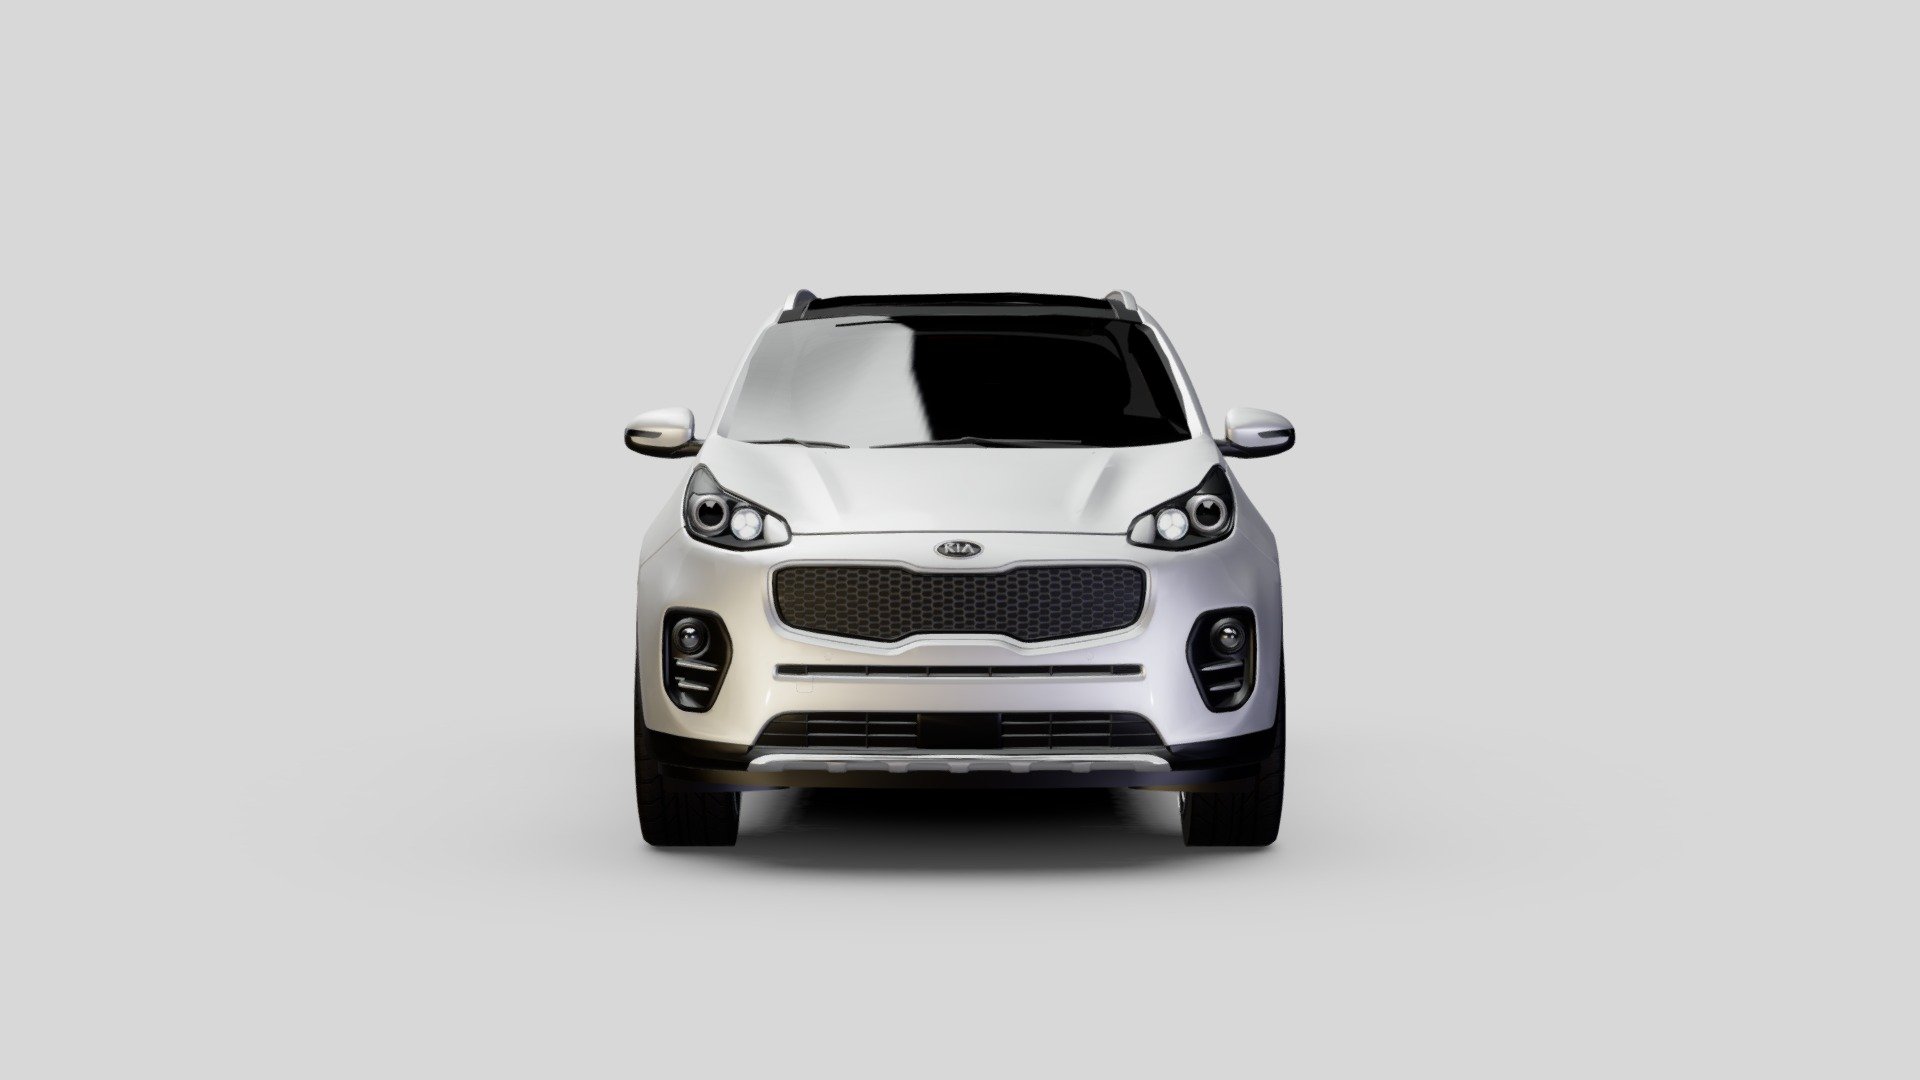 Kia unveiled its newly redesigned Sportage at the Frankfurt Motor Show in September 2015, and brought it to market in 2017. The company said the contrasting sharp edges and smooth surfaces were inspired by modern fighter jets. In North America, the new Sportage is offered with three trim levels (LX, EX, and SX). Much like the previous model, it is available with two inline-four engine choices, a naturally aspirated 2.4-liter and a turbocharged 2.0-liter. The 2.4-liter produces 181 hp (135 kW) and 175 lb⋅ft (237 N⋅m), while the turbocharged engine makes 240 hp (180 kW) and 260 lb⋅ft (350 N⋅m), with small differences in performance dependent on whether FWD or AWD is configured. Both engines are mated to a six-speed automatic transmission.

Credits:



D3NKE
 - 2017 KIA Sportage - Download Free 3D model by iSteven (@OneSteven) 3d model